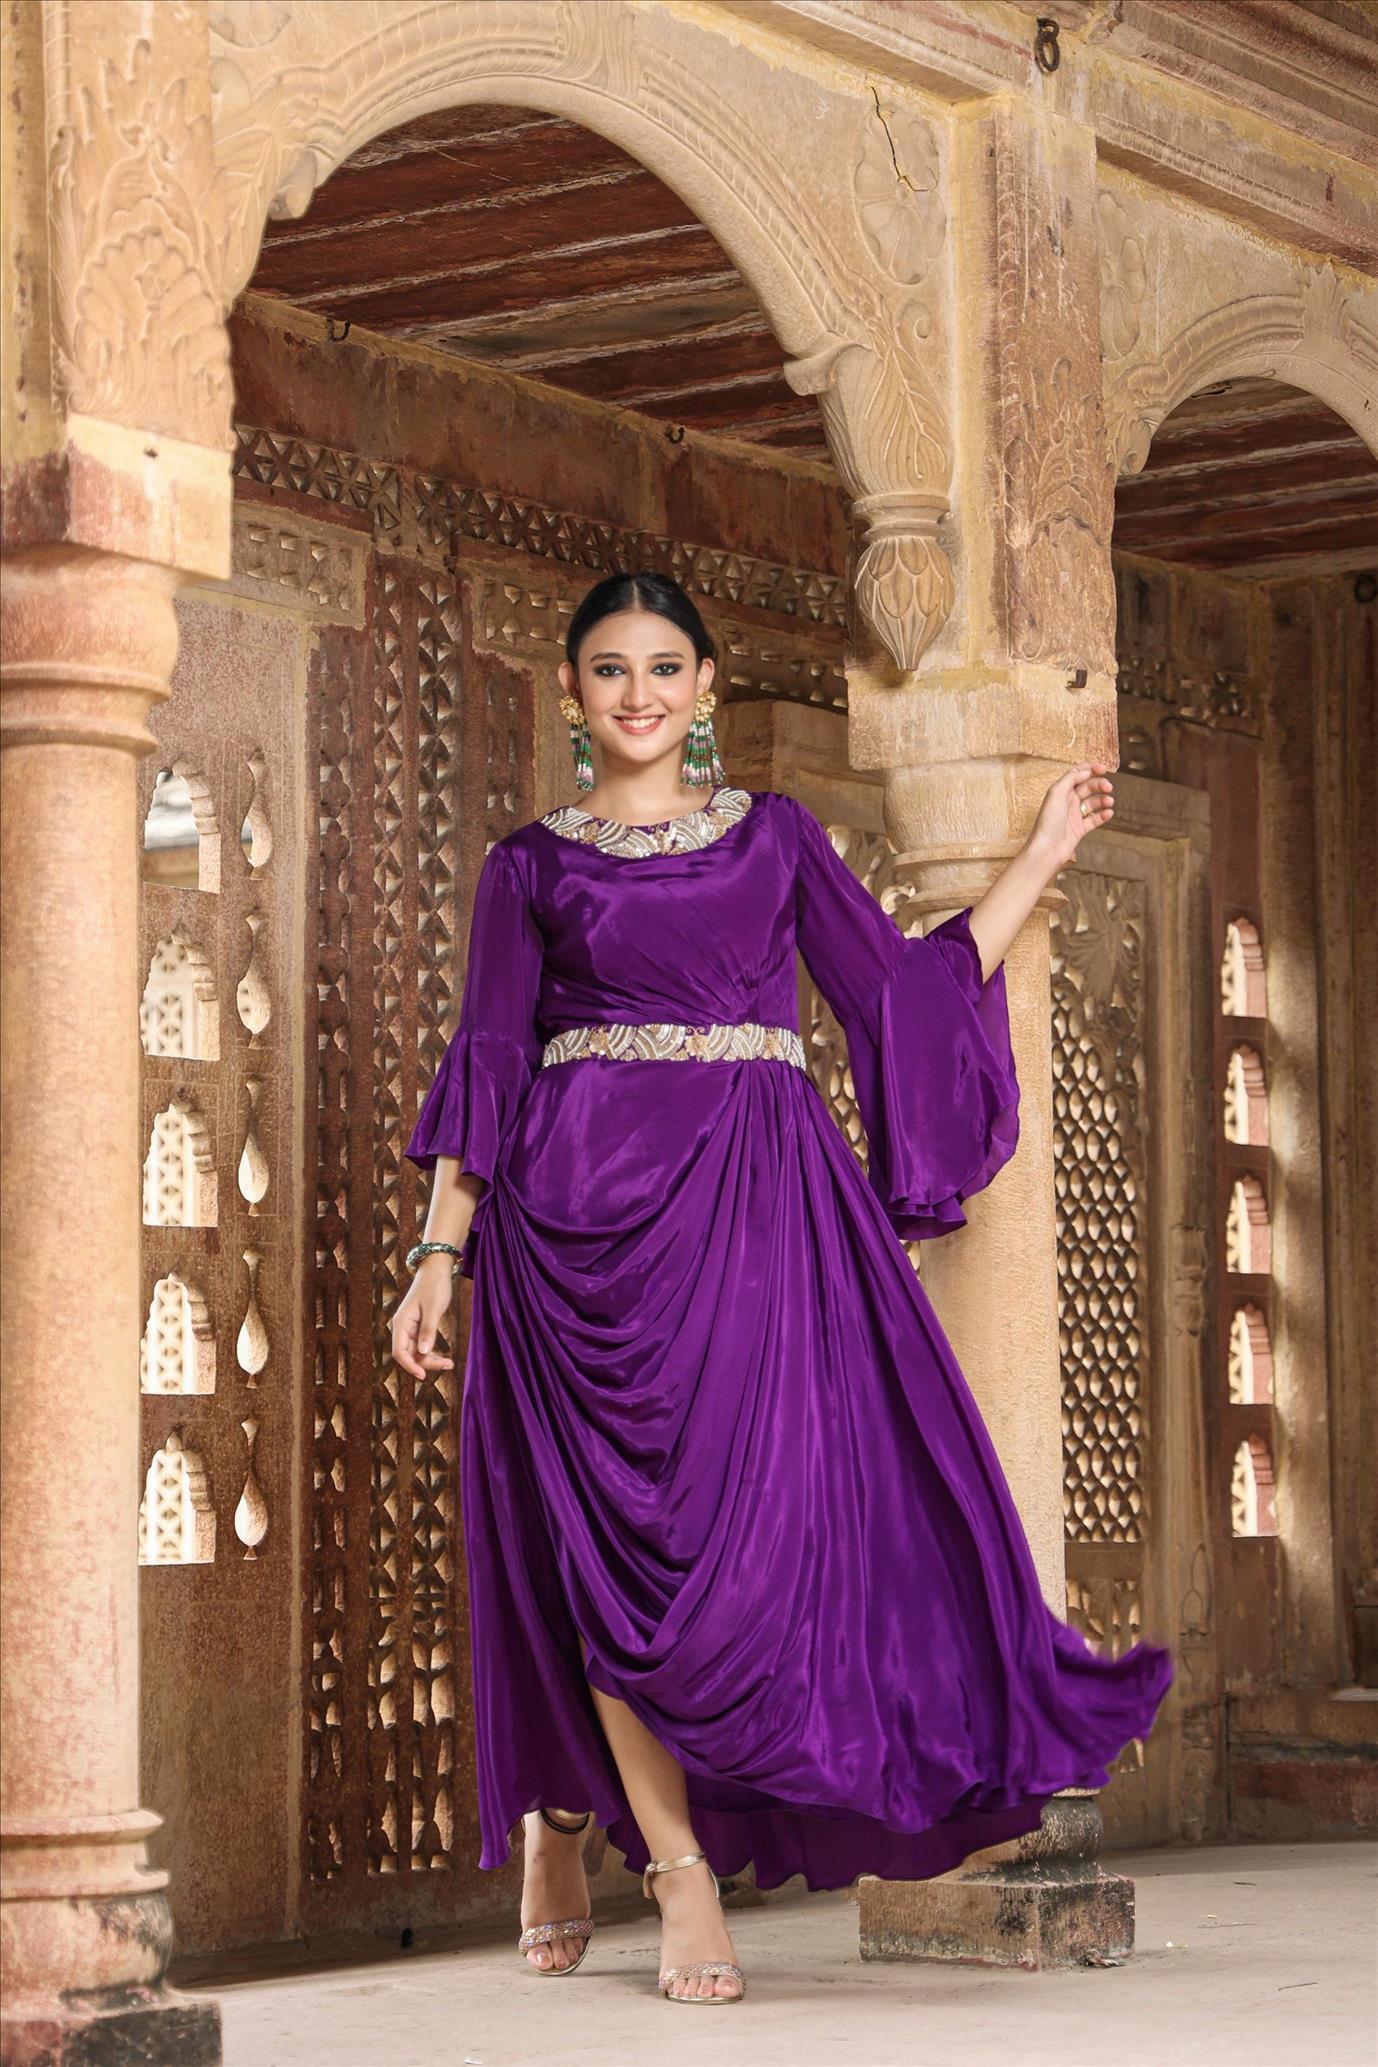 Purple Crepe Solid Drape Gown With Embellished Neck And Belt